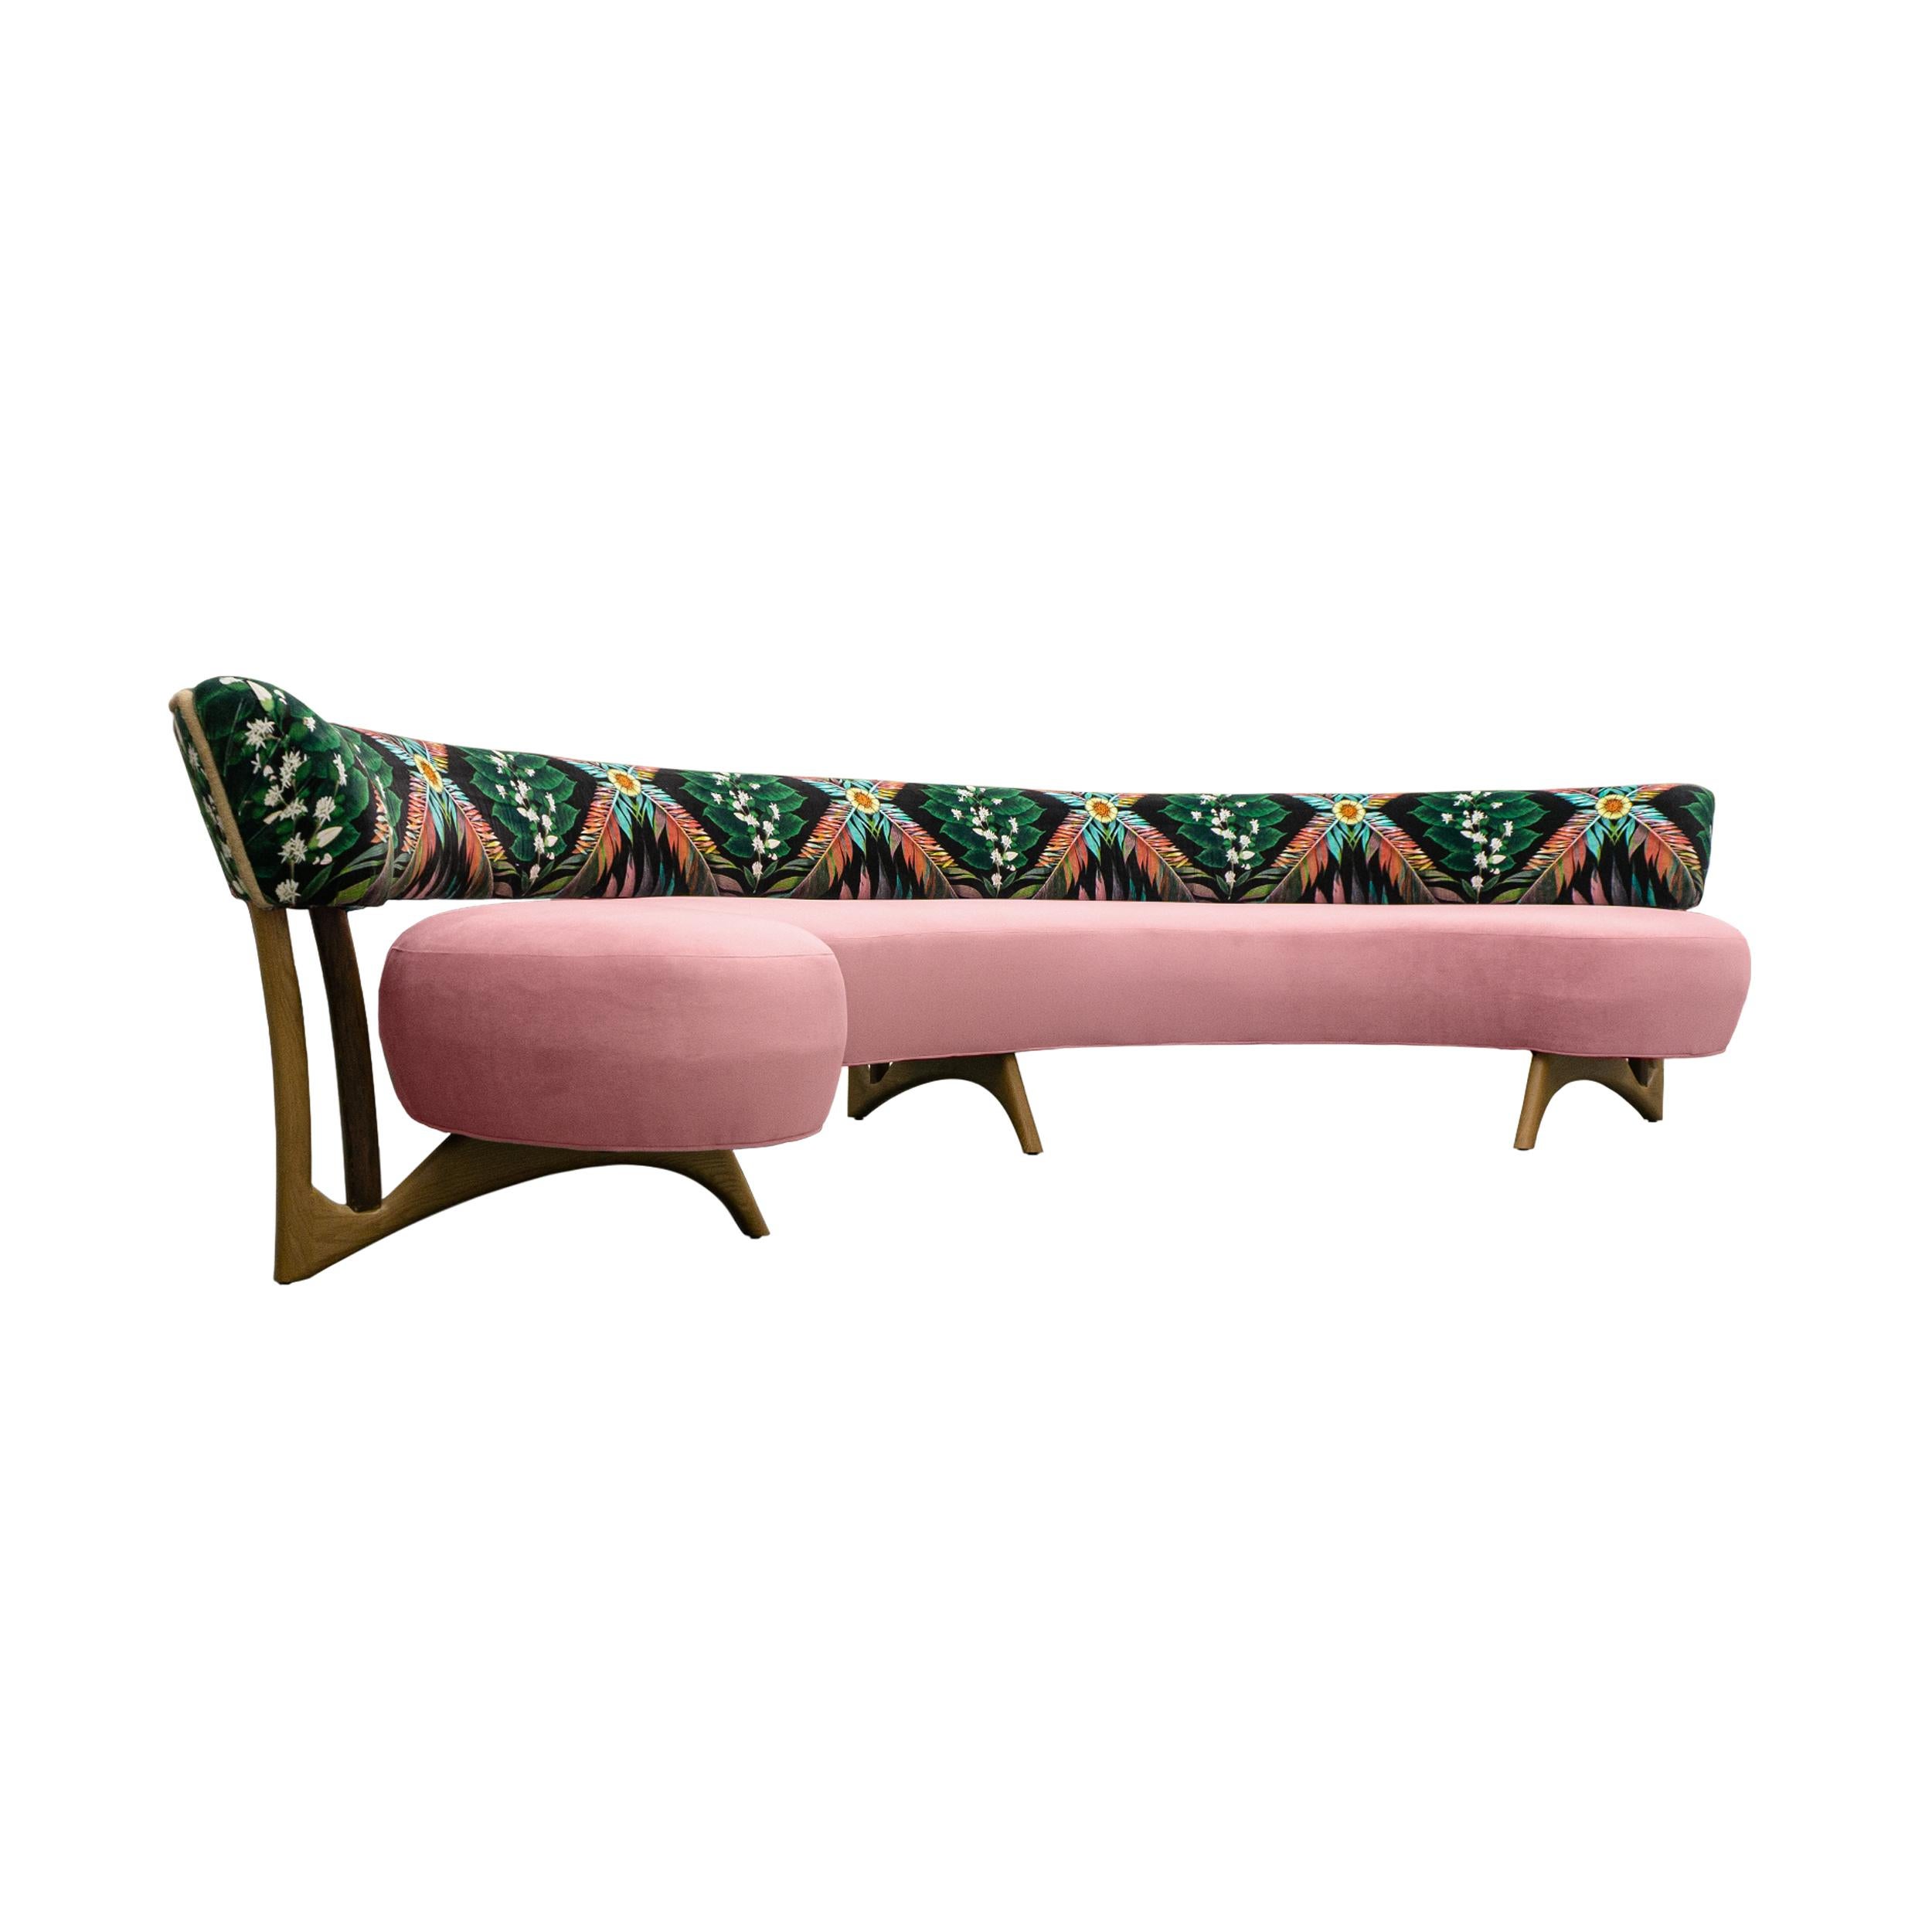 This midcentury floating curved sofa features a soft decorative printed velvet from Christian Lacroix on the back, a rich pile velvet weave in blossom pink on the seat, burlap welting on the back edges and morado accented stained white oak curved